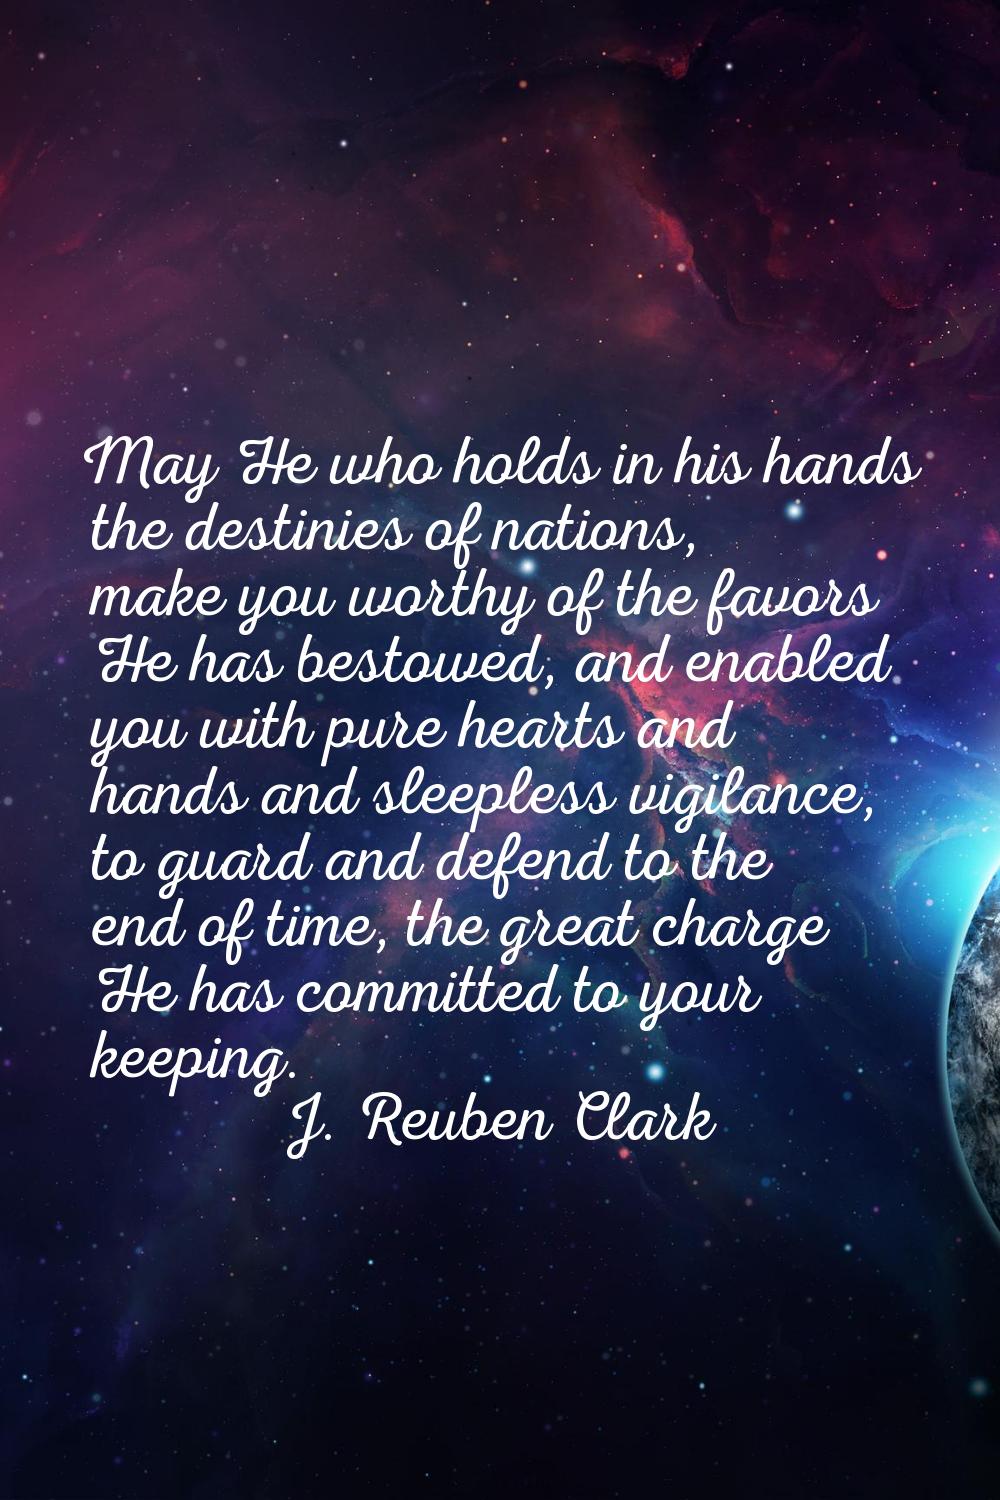 May He who holds in his hands the destinies of nations, make you worthy of the favors He has bestow